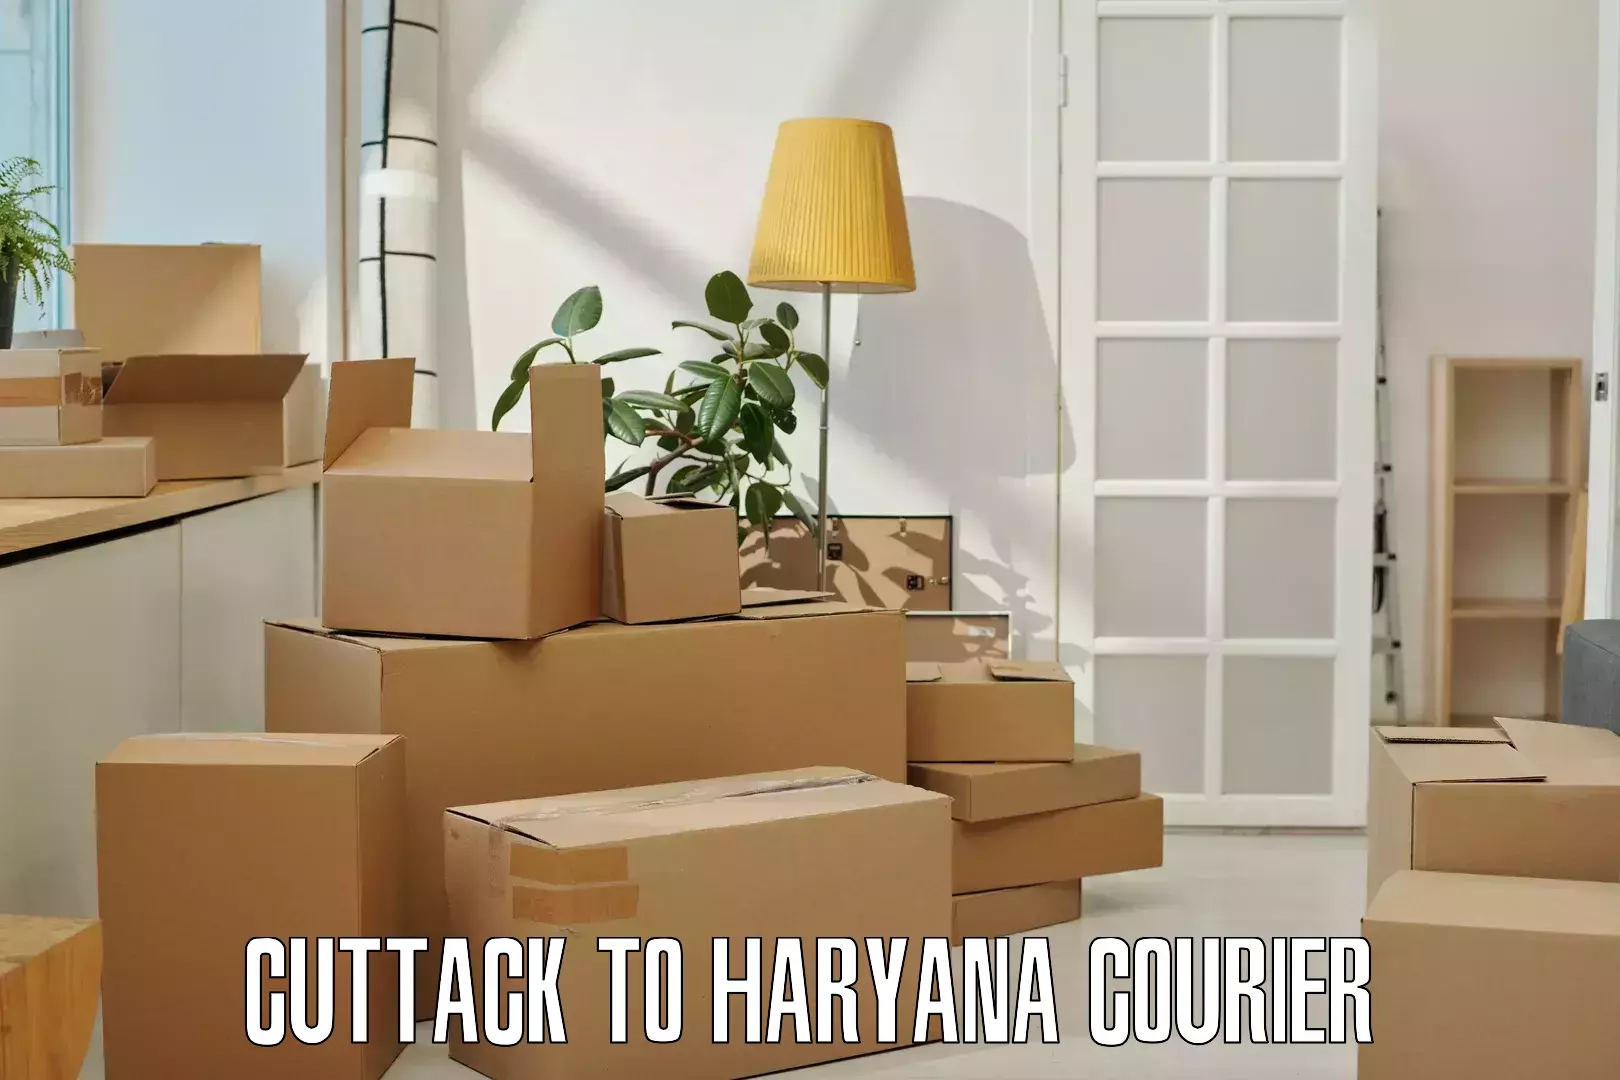 State-of-the-art courier technology Cuttack to Abhimanyupur